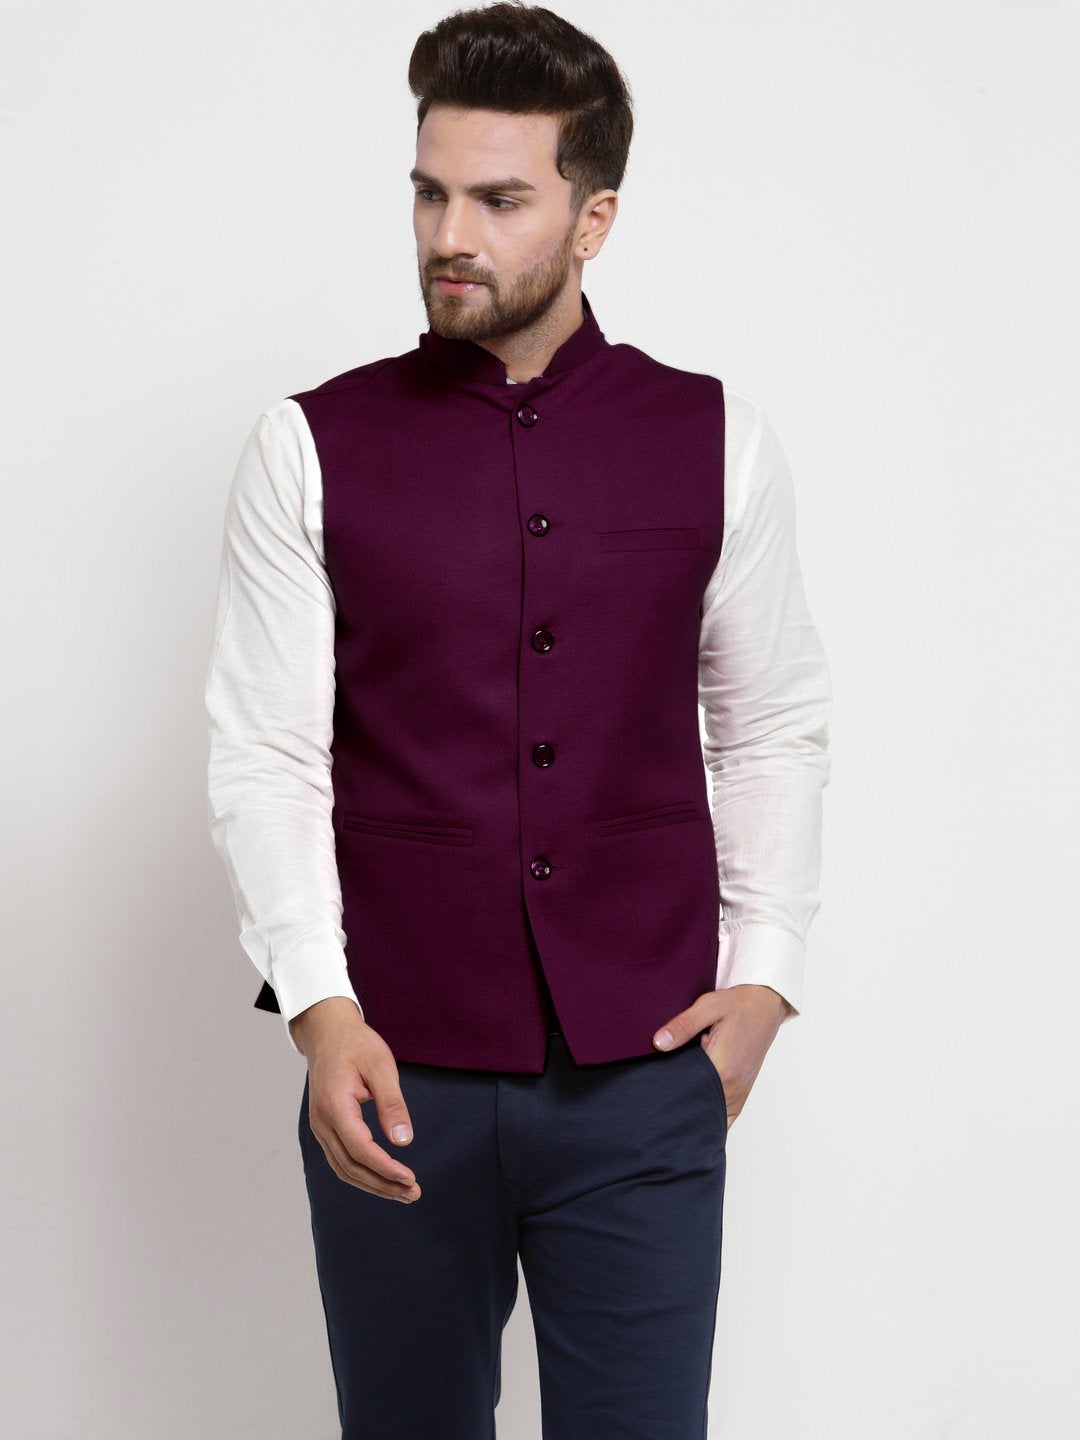 Buy White 3-Piece Ethnic Suit for Men by Even Online | Ajio.com